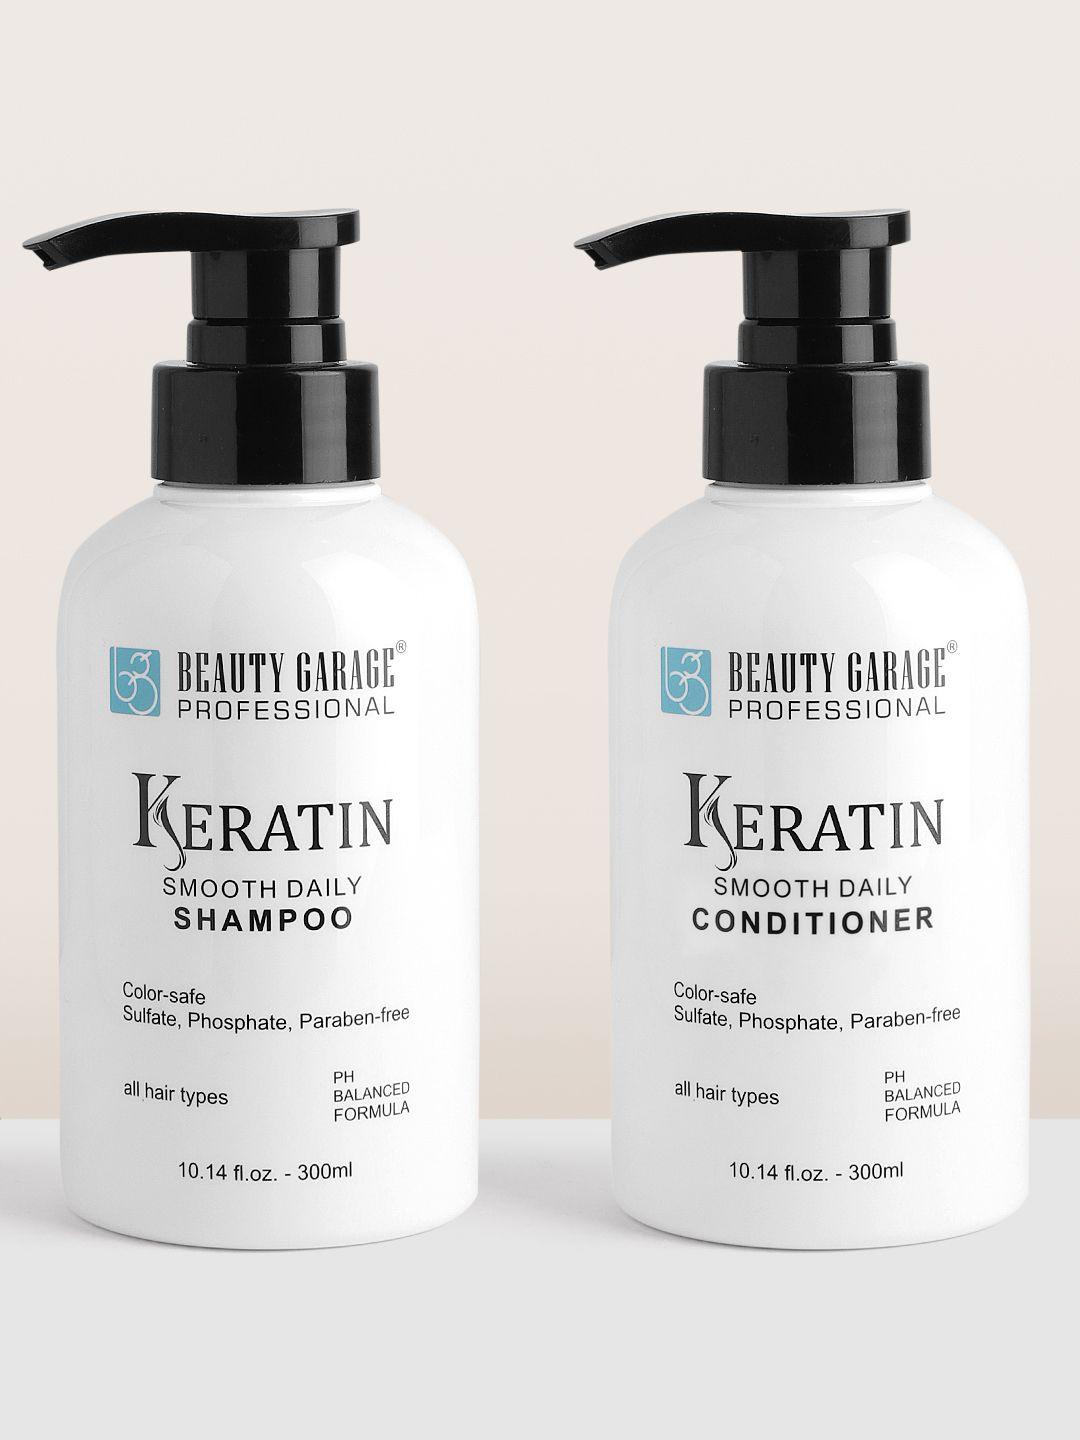 beauty garage set of keratin smooth daily shampoo & conditioner - 300 ml each